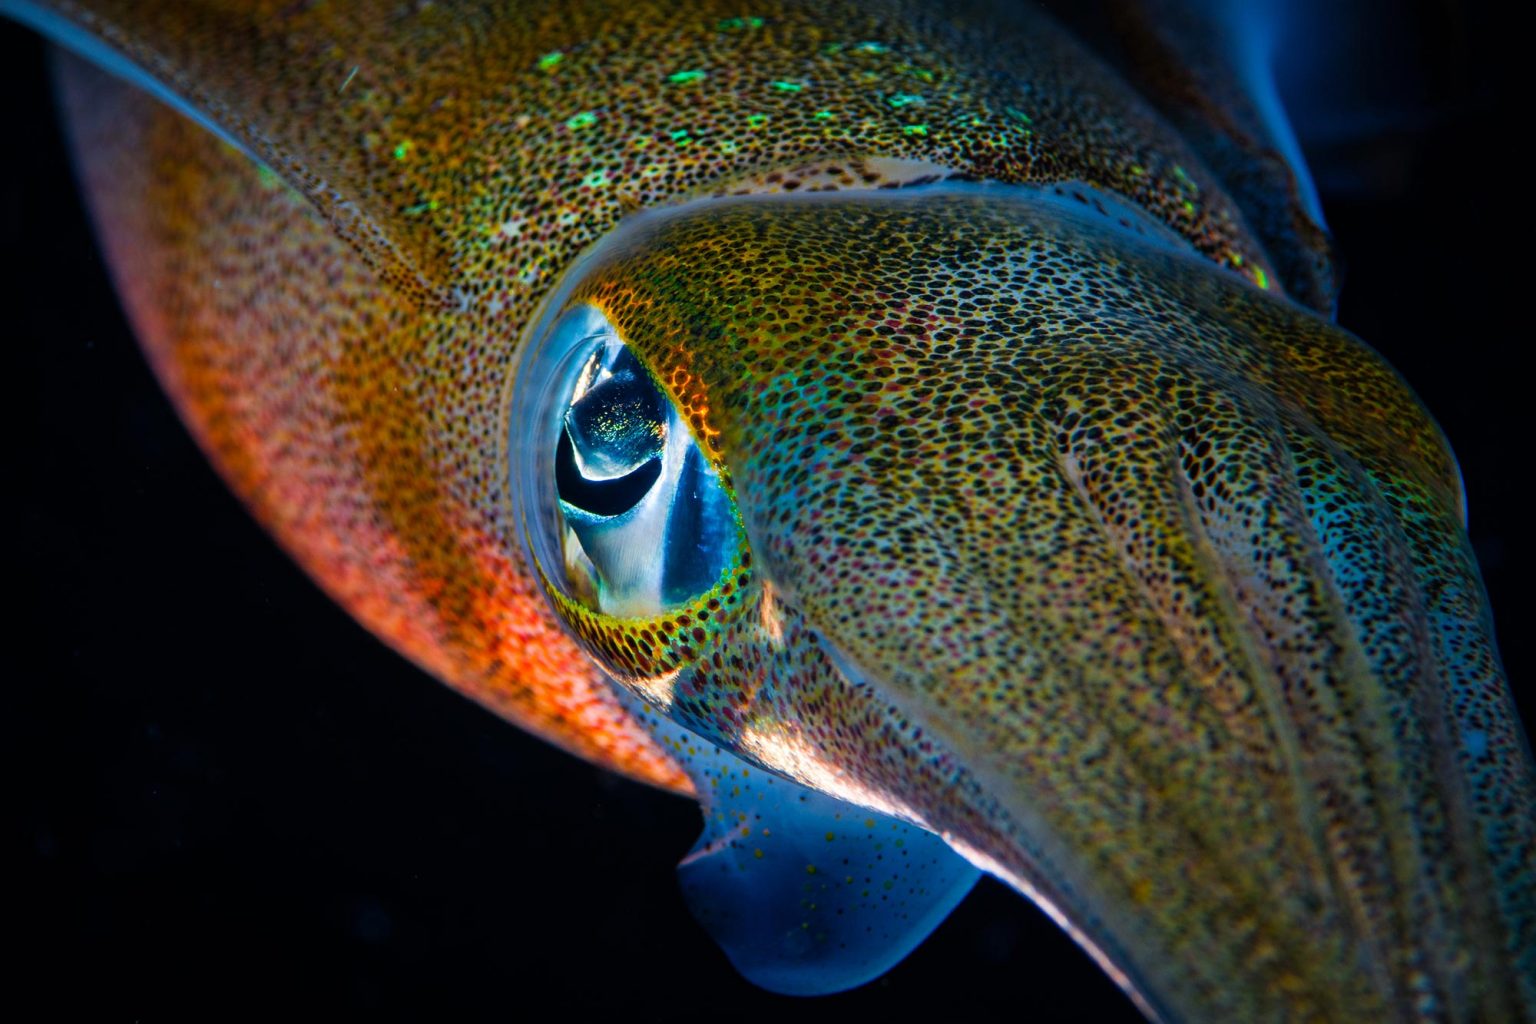 “Superpower” Discovered in Squids They Can Massively Edit Their Own